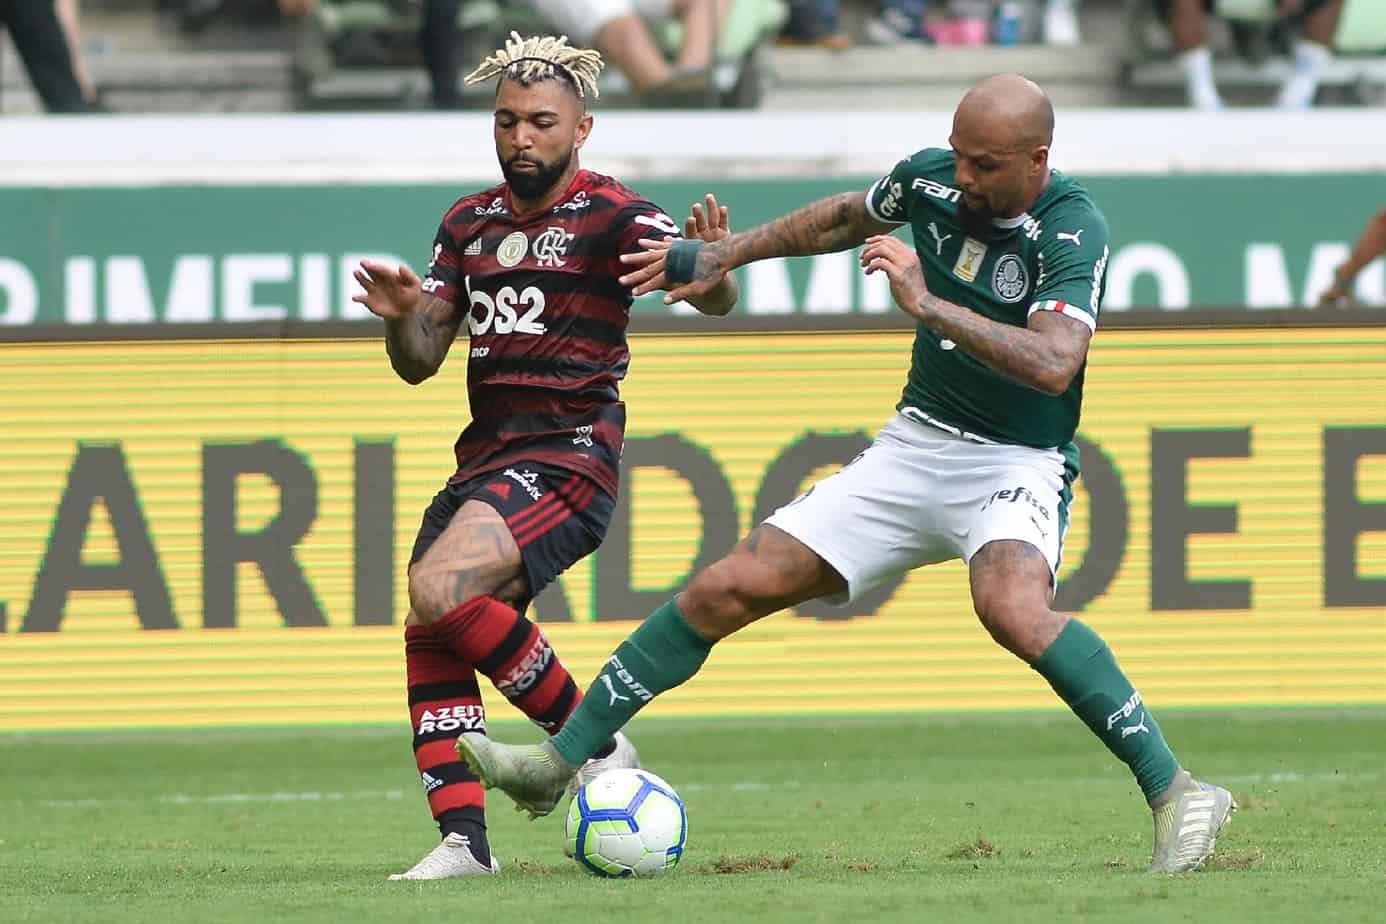 Palmeiras vs. Flamengo – Betting Odds and Free Pick